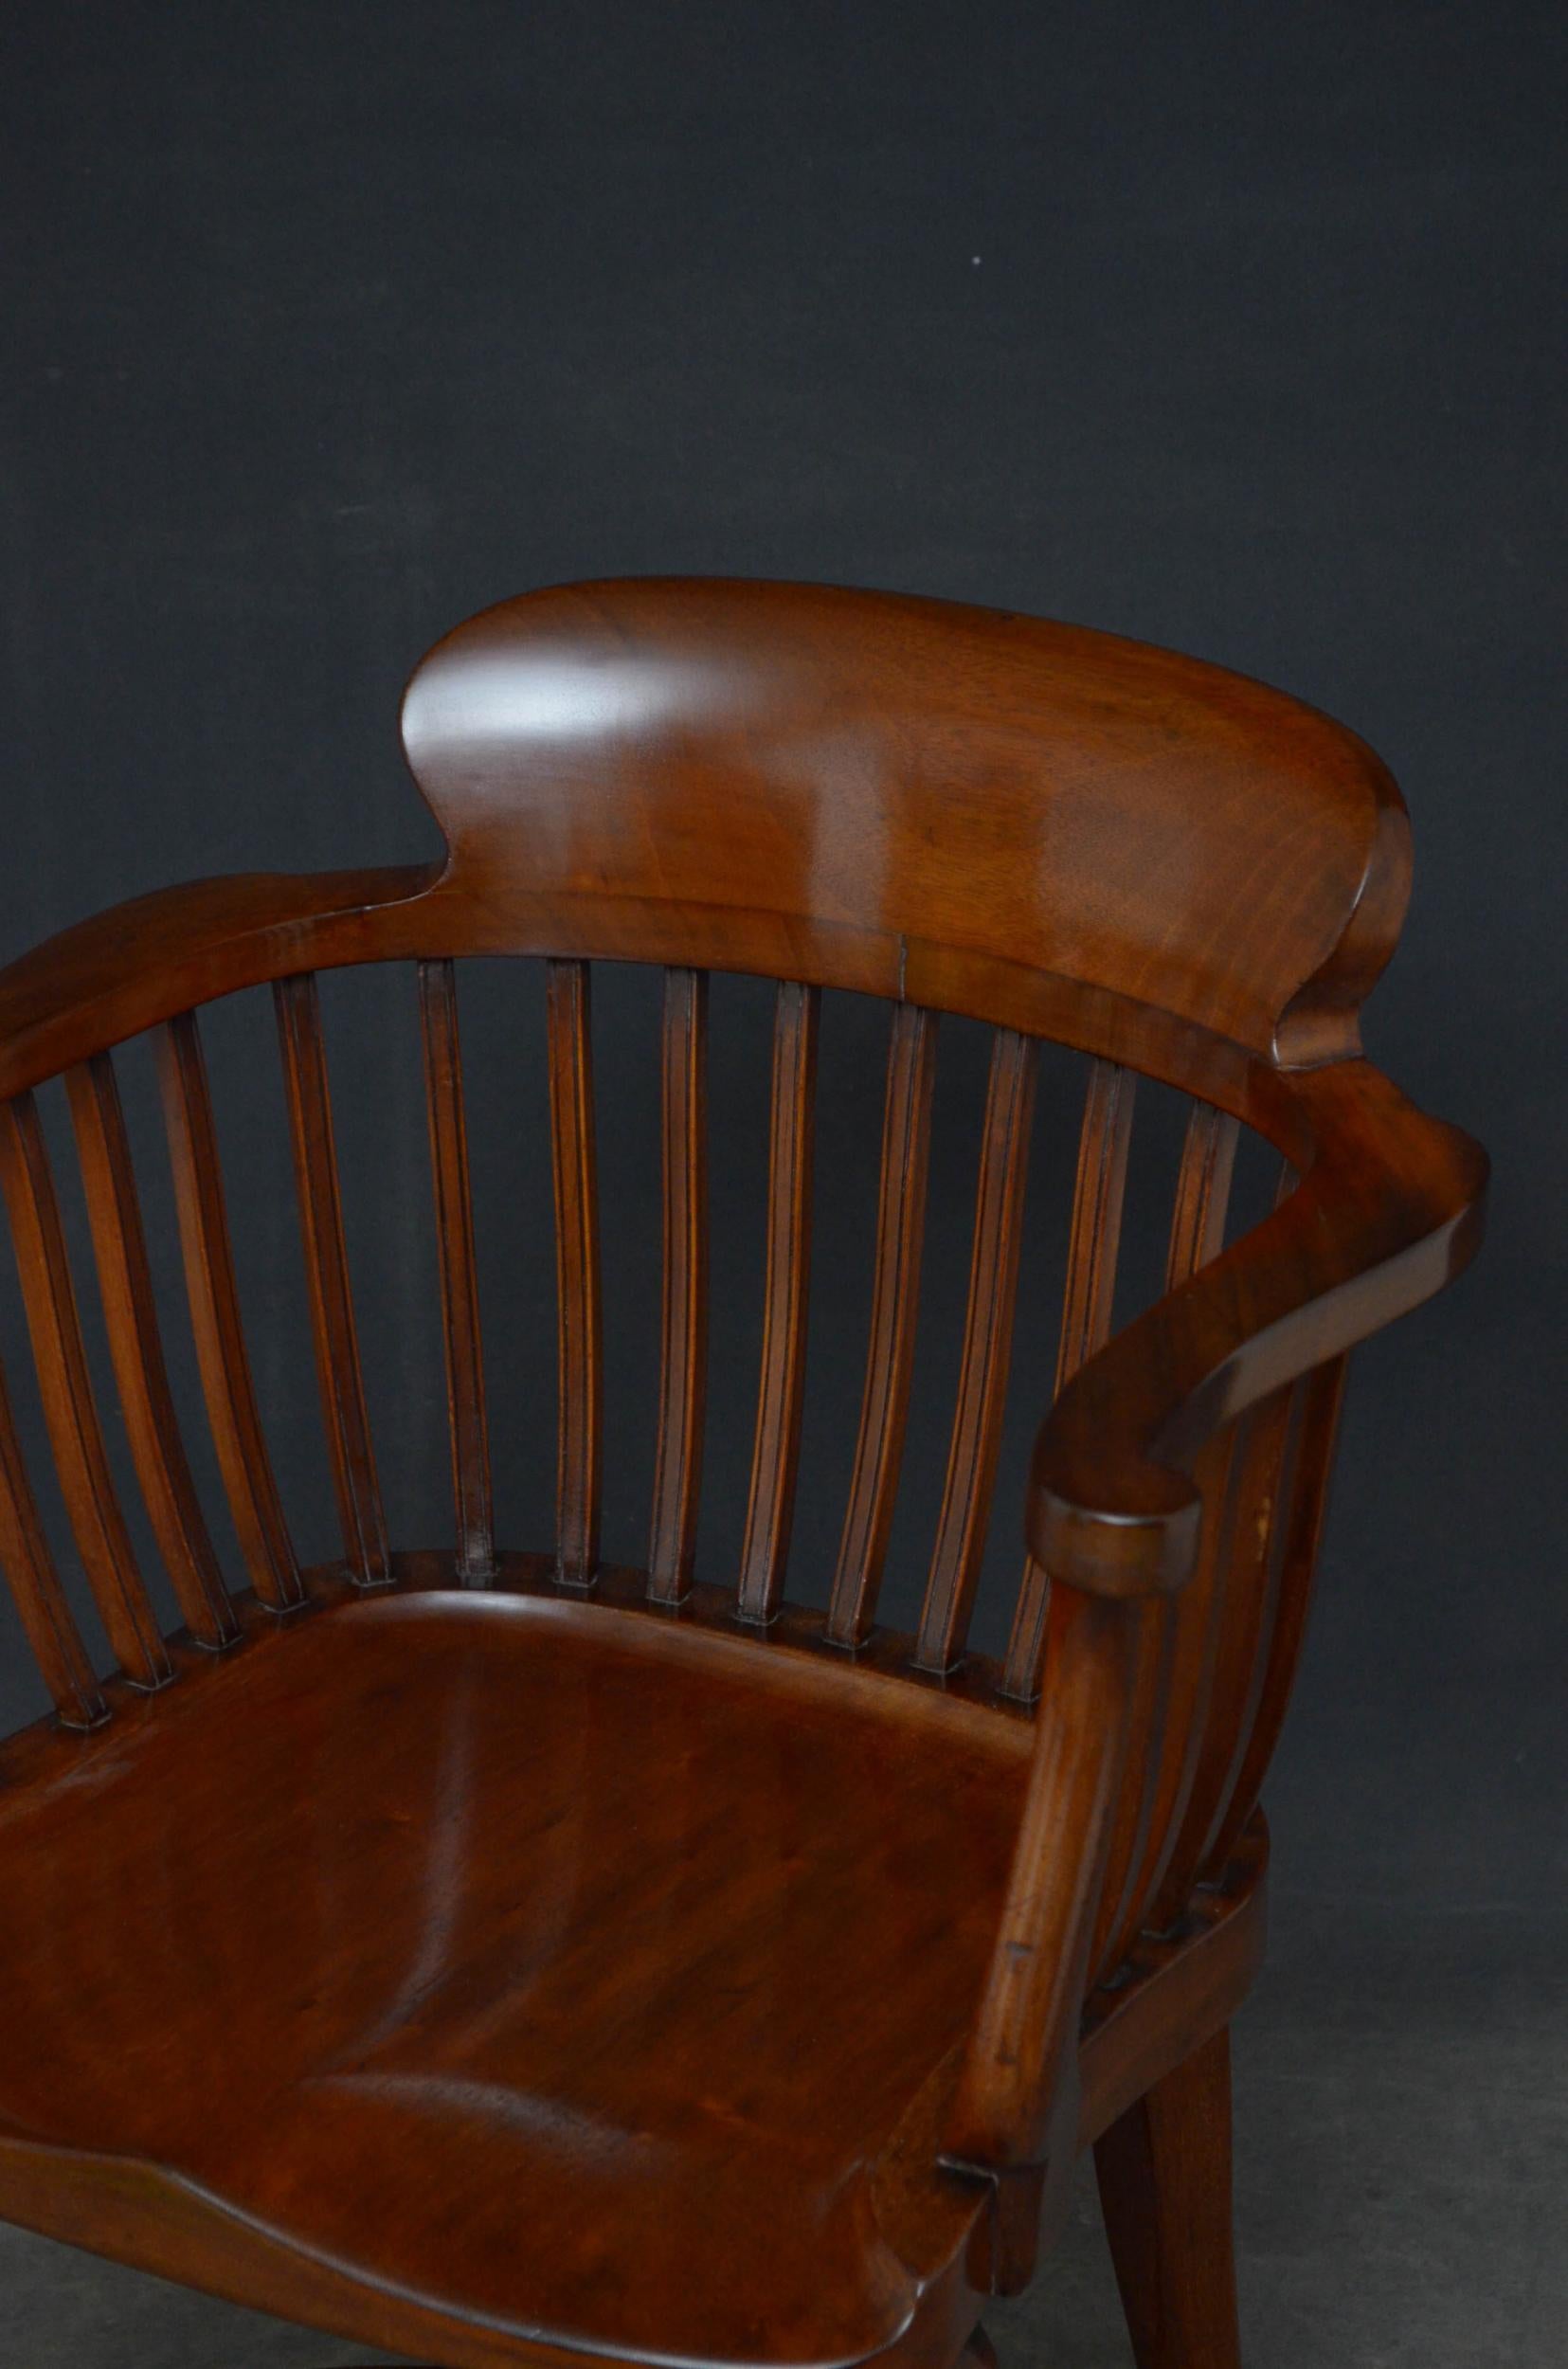 Sn4884 late Victorian desk chair in mahogany, having shaped top rail above reeded slats, outswept arms and generous seat, standing on cabriole legs united by crinoline stretches. This antique chair retains its original finish and patina, all in home